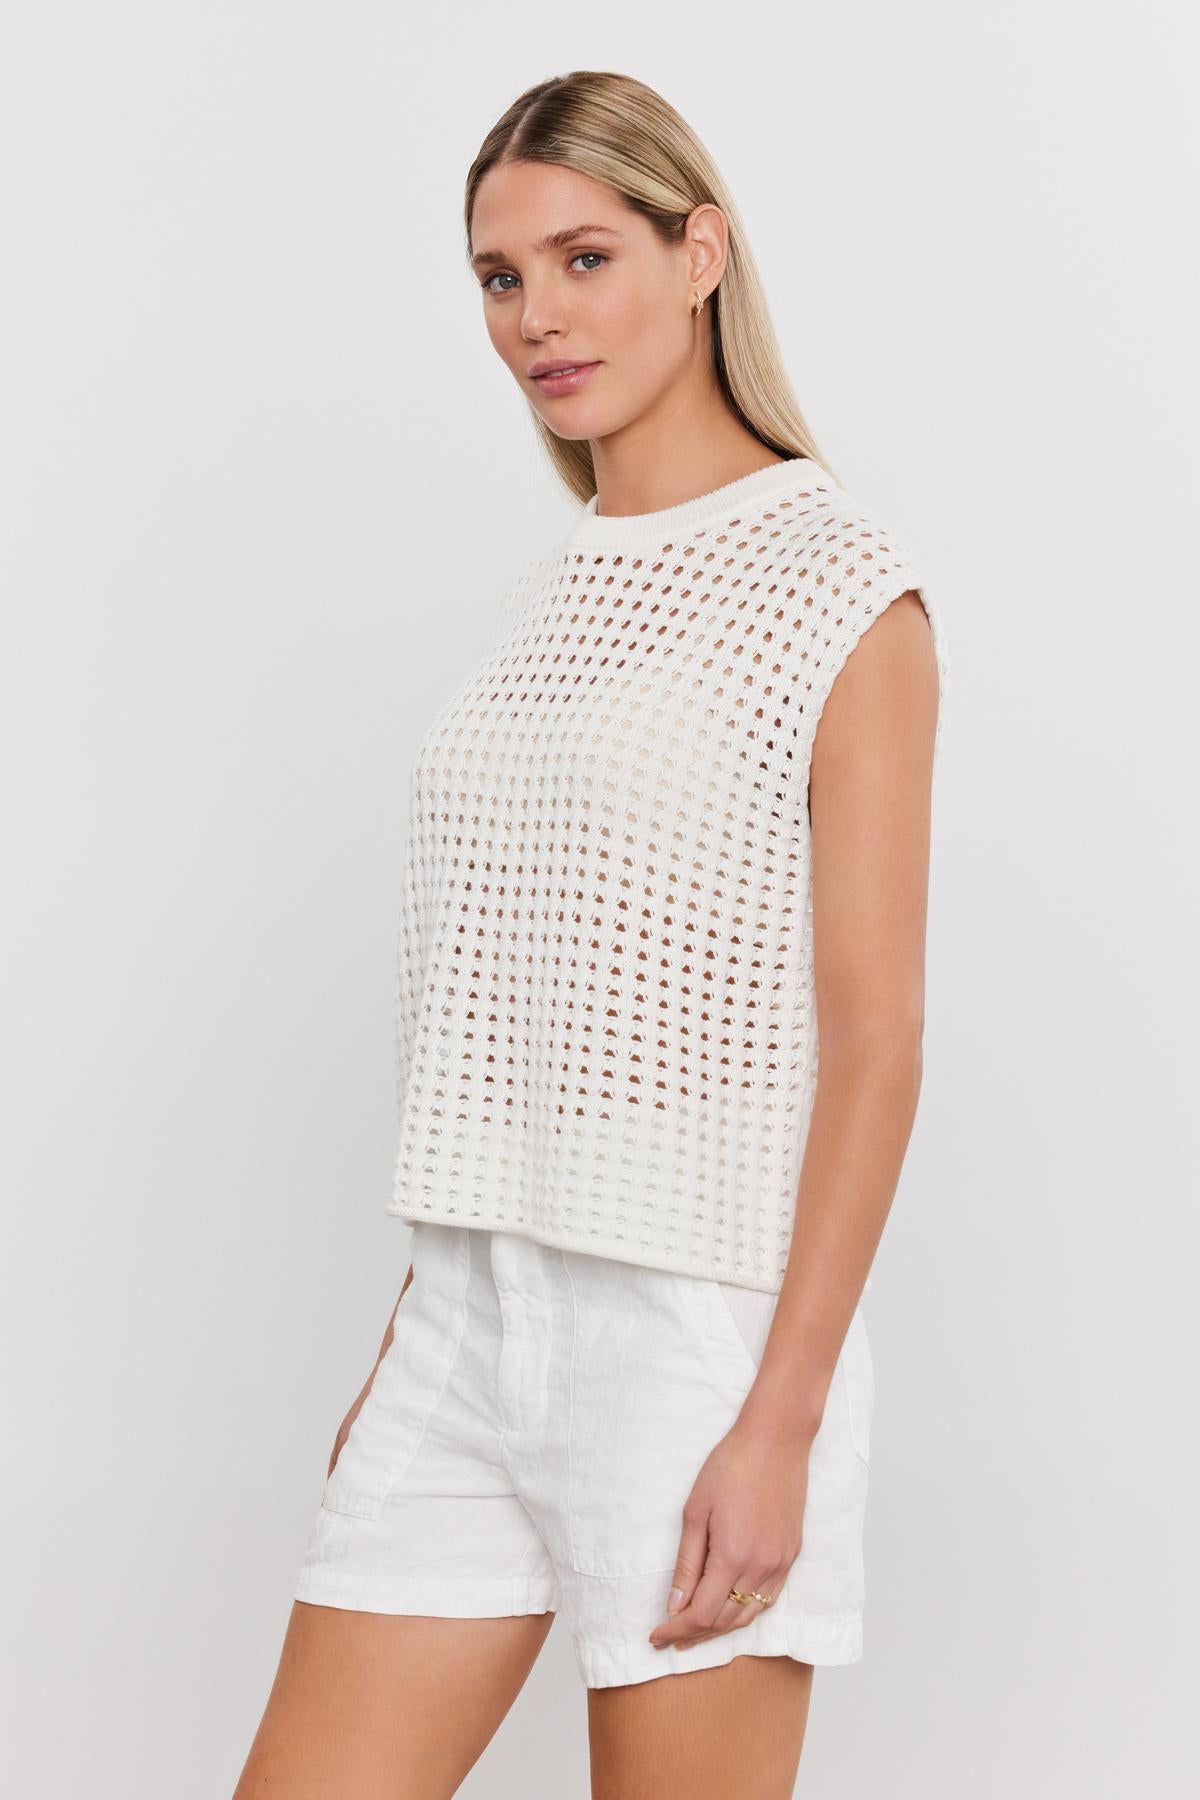 A person with long blond hair is wearing a white sleeveless MAISON SWEATER by Velvet by Graham & Spencer and white shorts, standing against a plain white background.-37162037706945